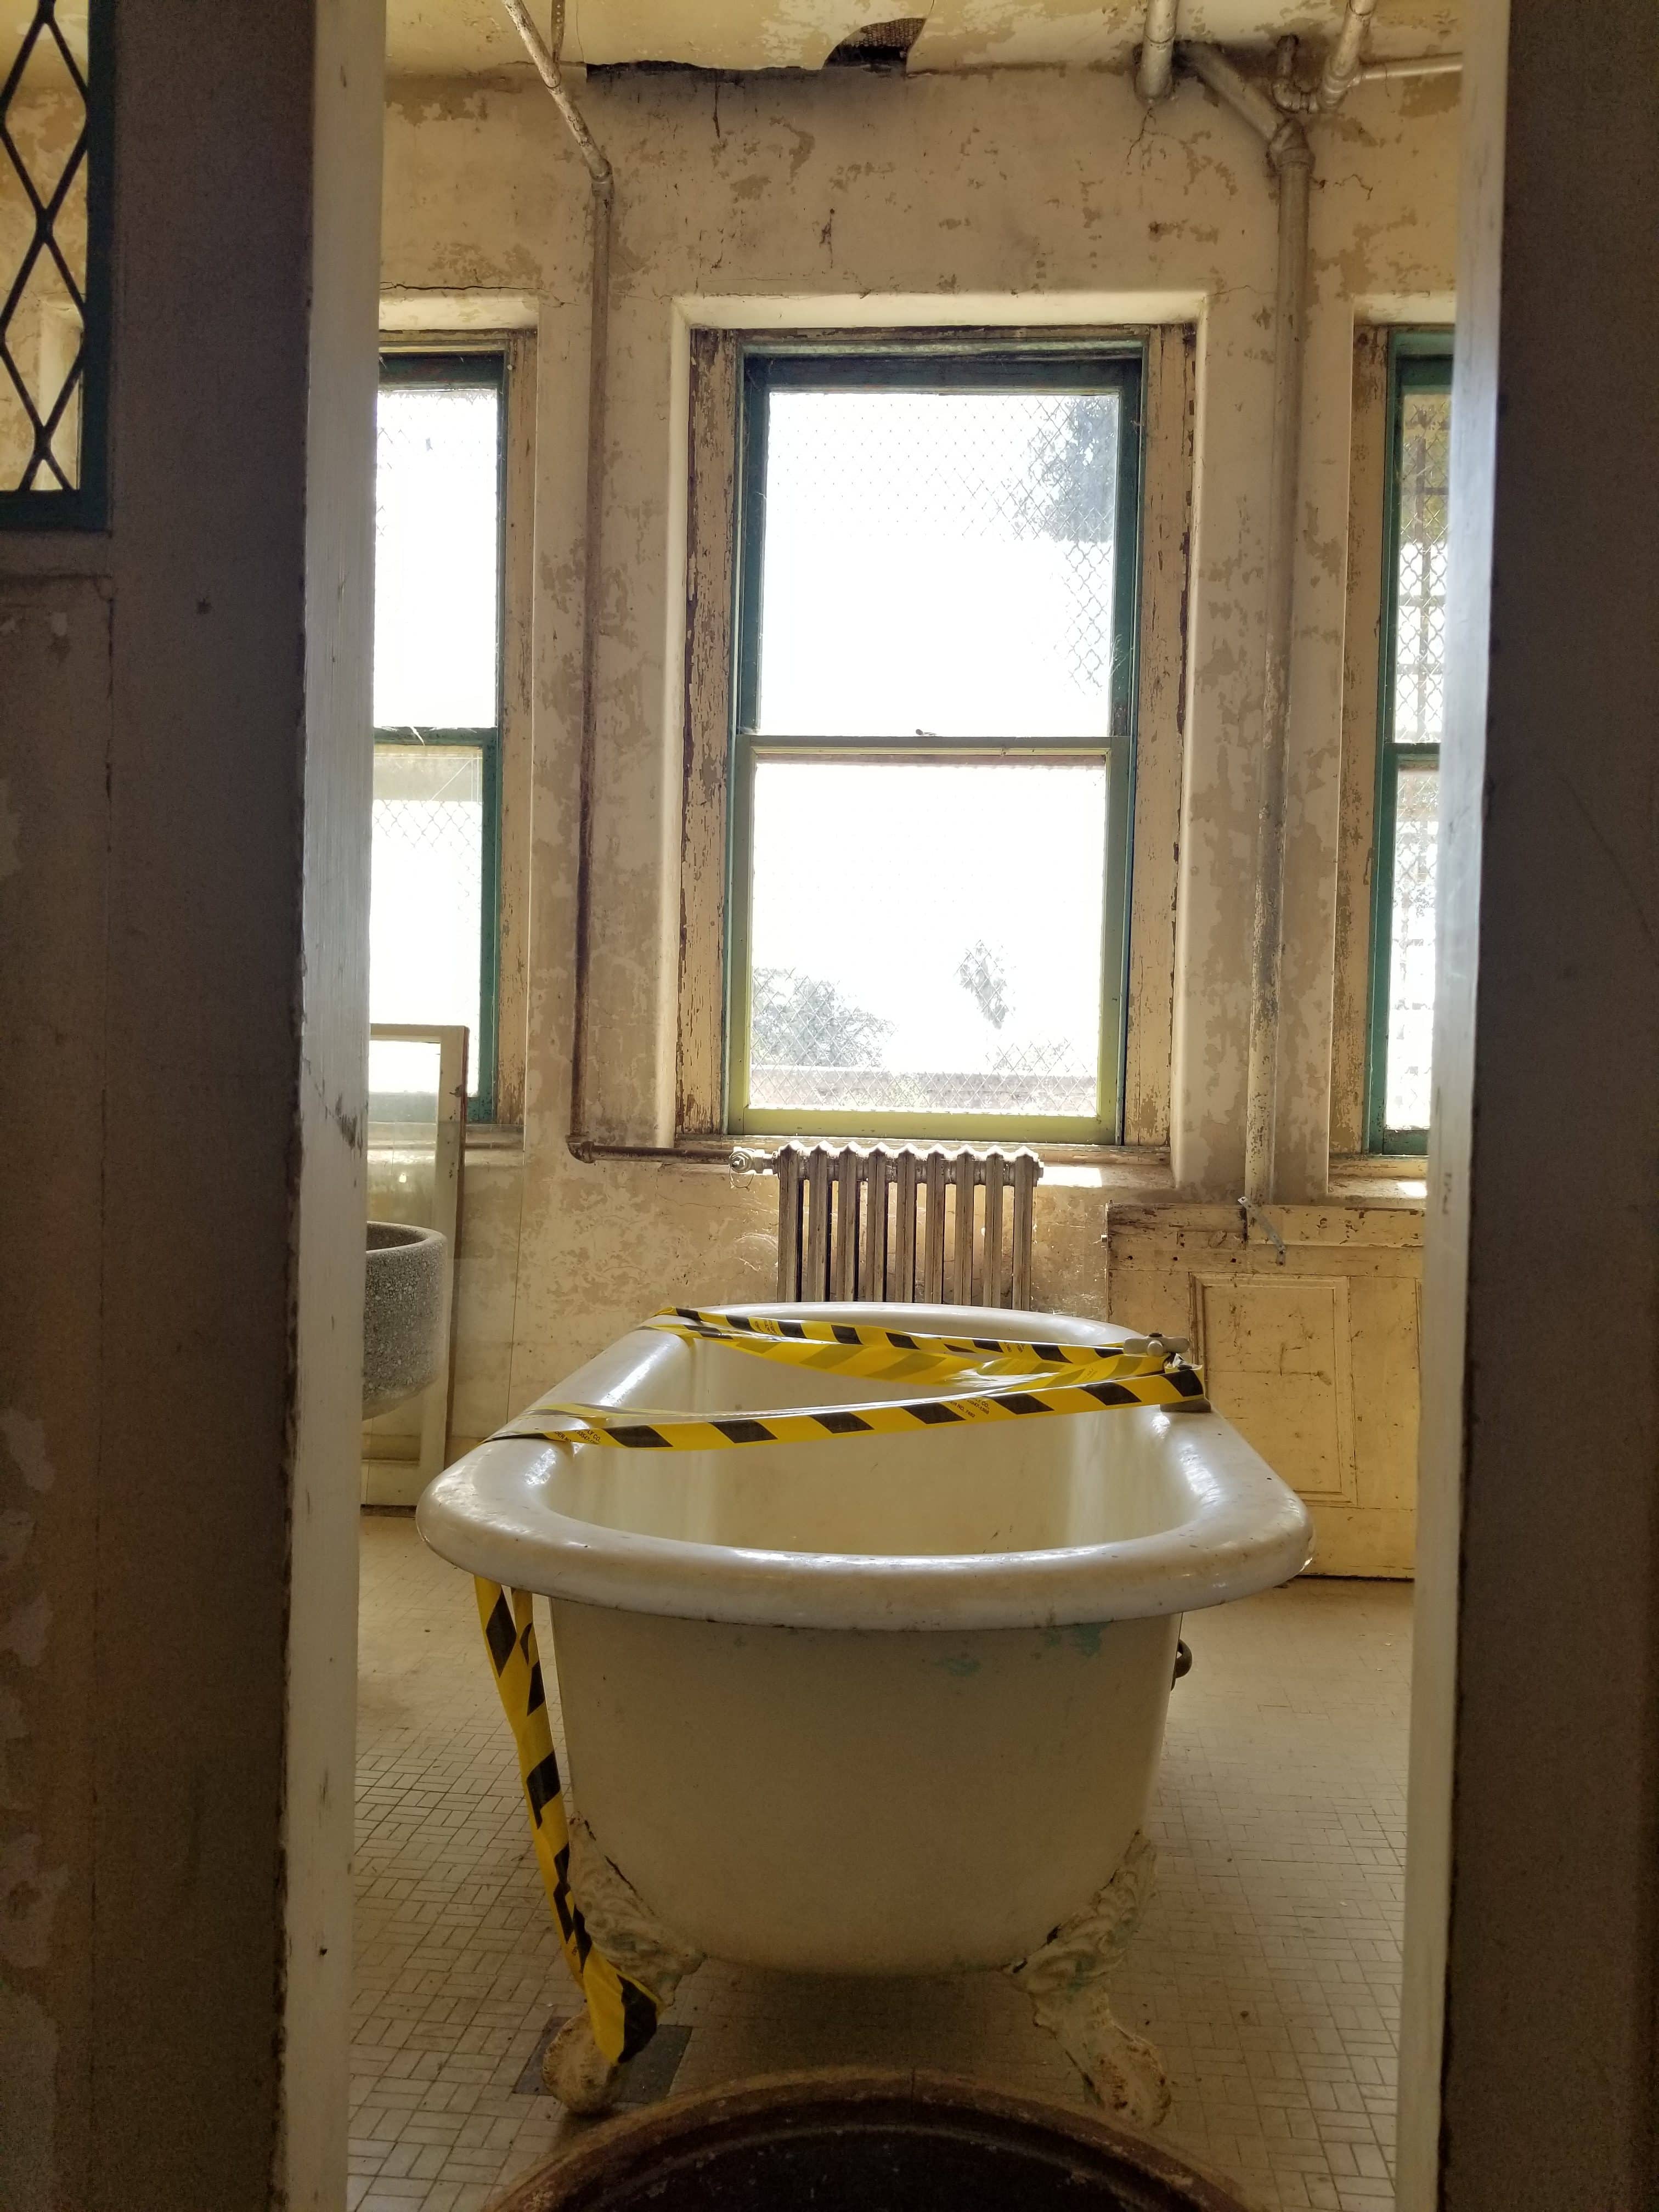 antique claw foot bathtub covered with caution tape in filthy old bathroom